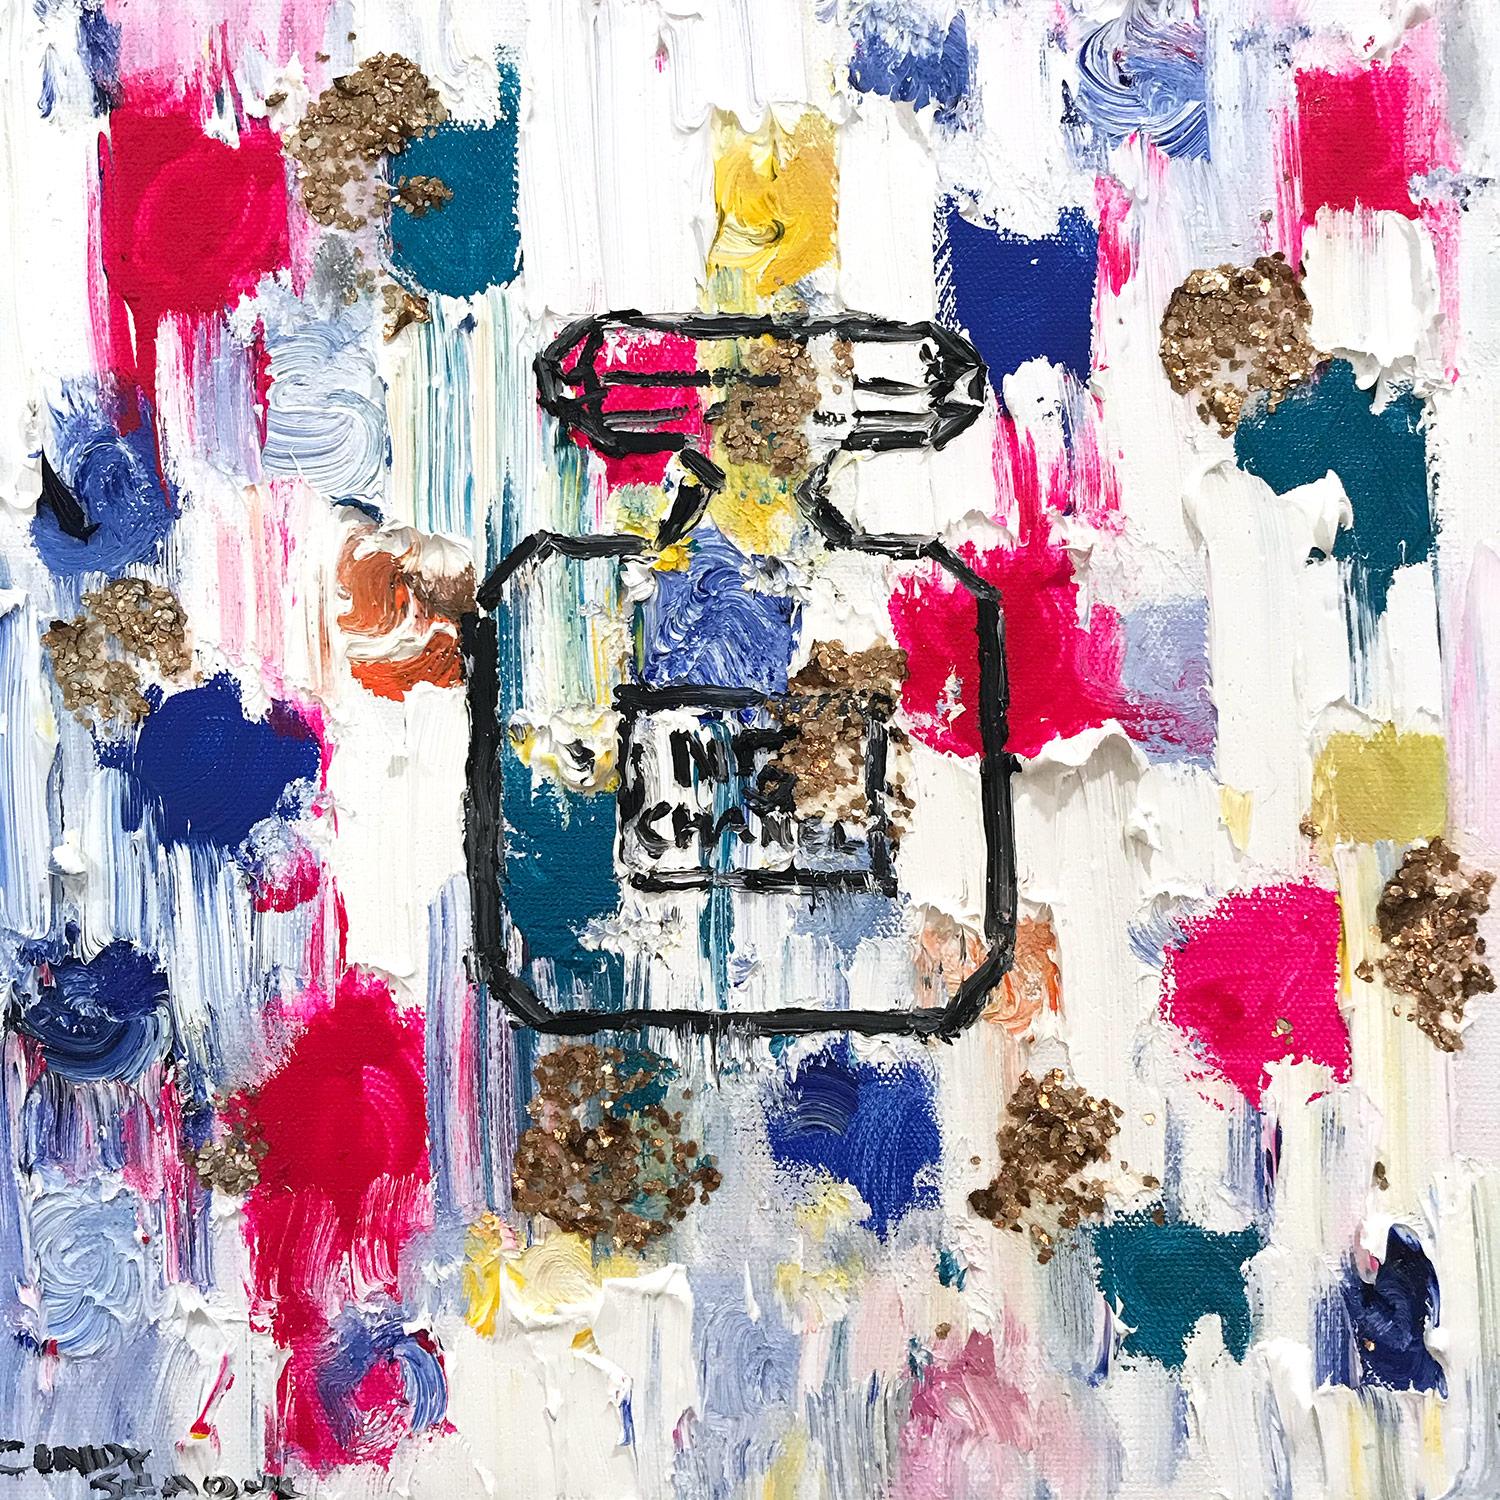 Cindy Shaoul Abstract Painting - "Dripping Dots - N5 in Cannes" Contemporary Perfume Bottle Chanel Painting